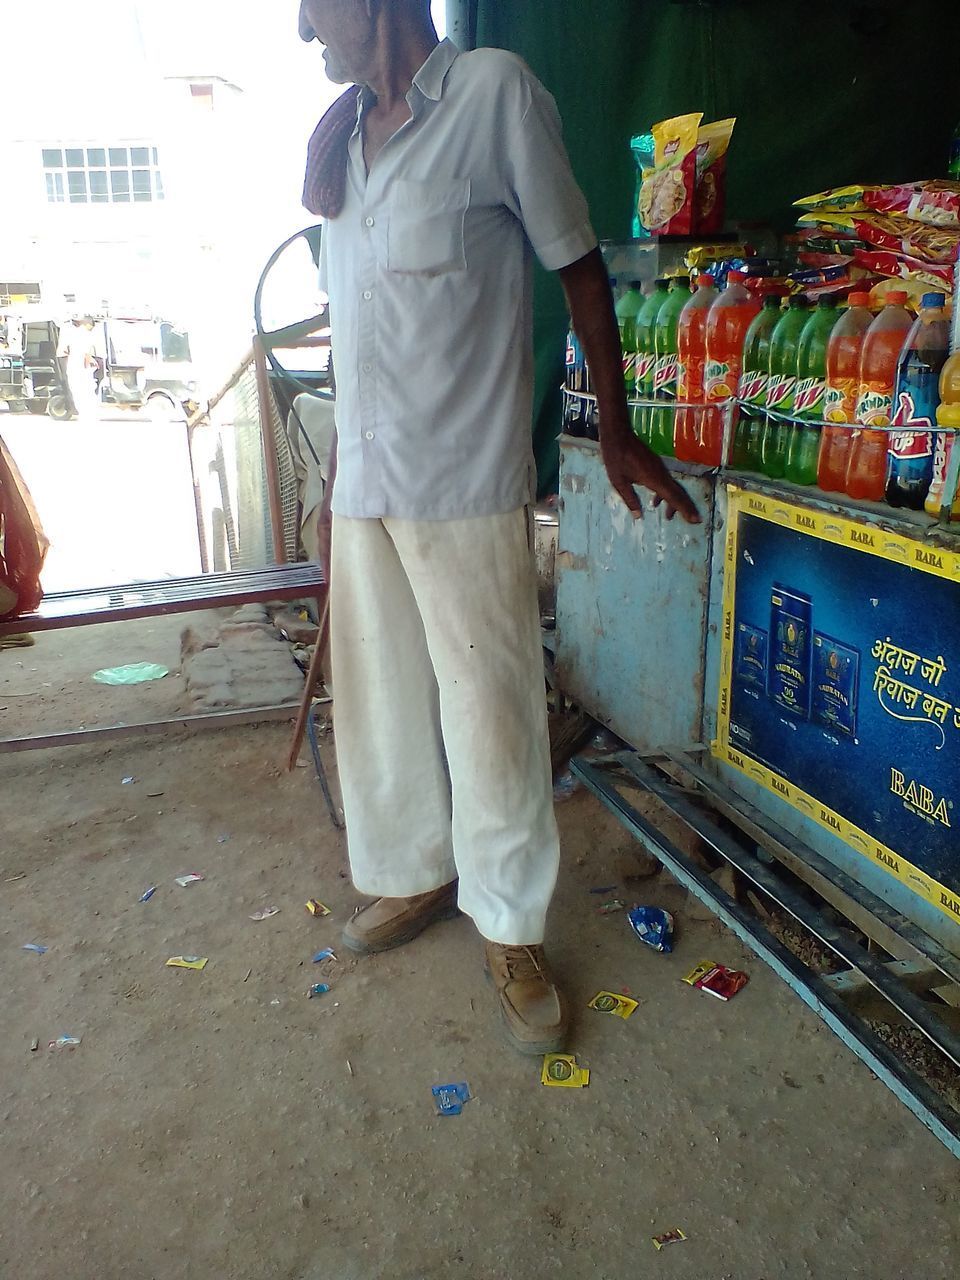 REAR VIEW OF MAN STANDING AT MARKET